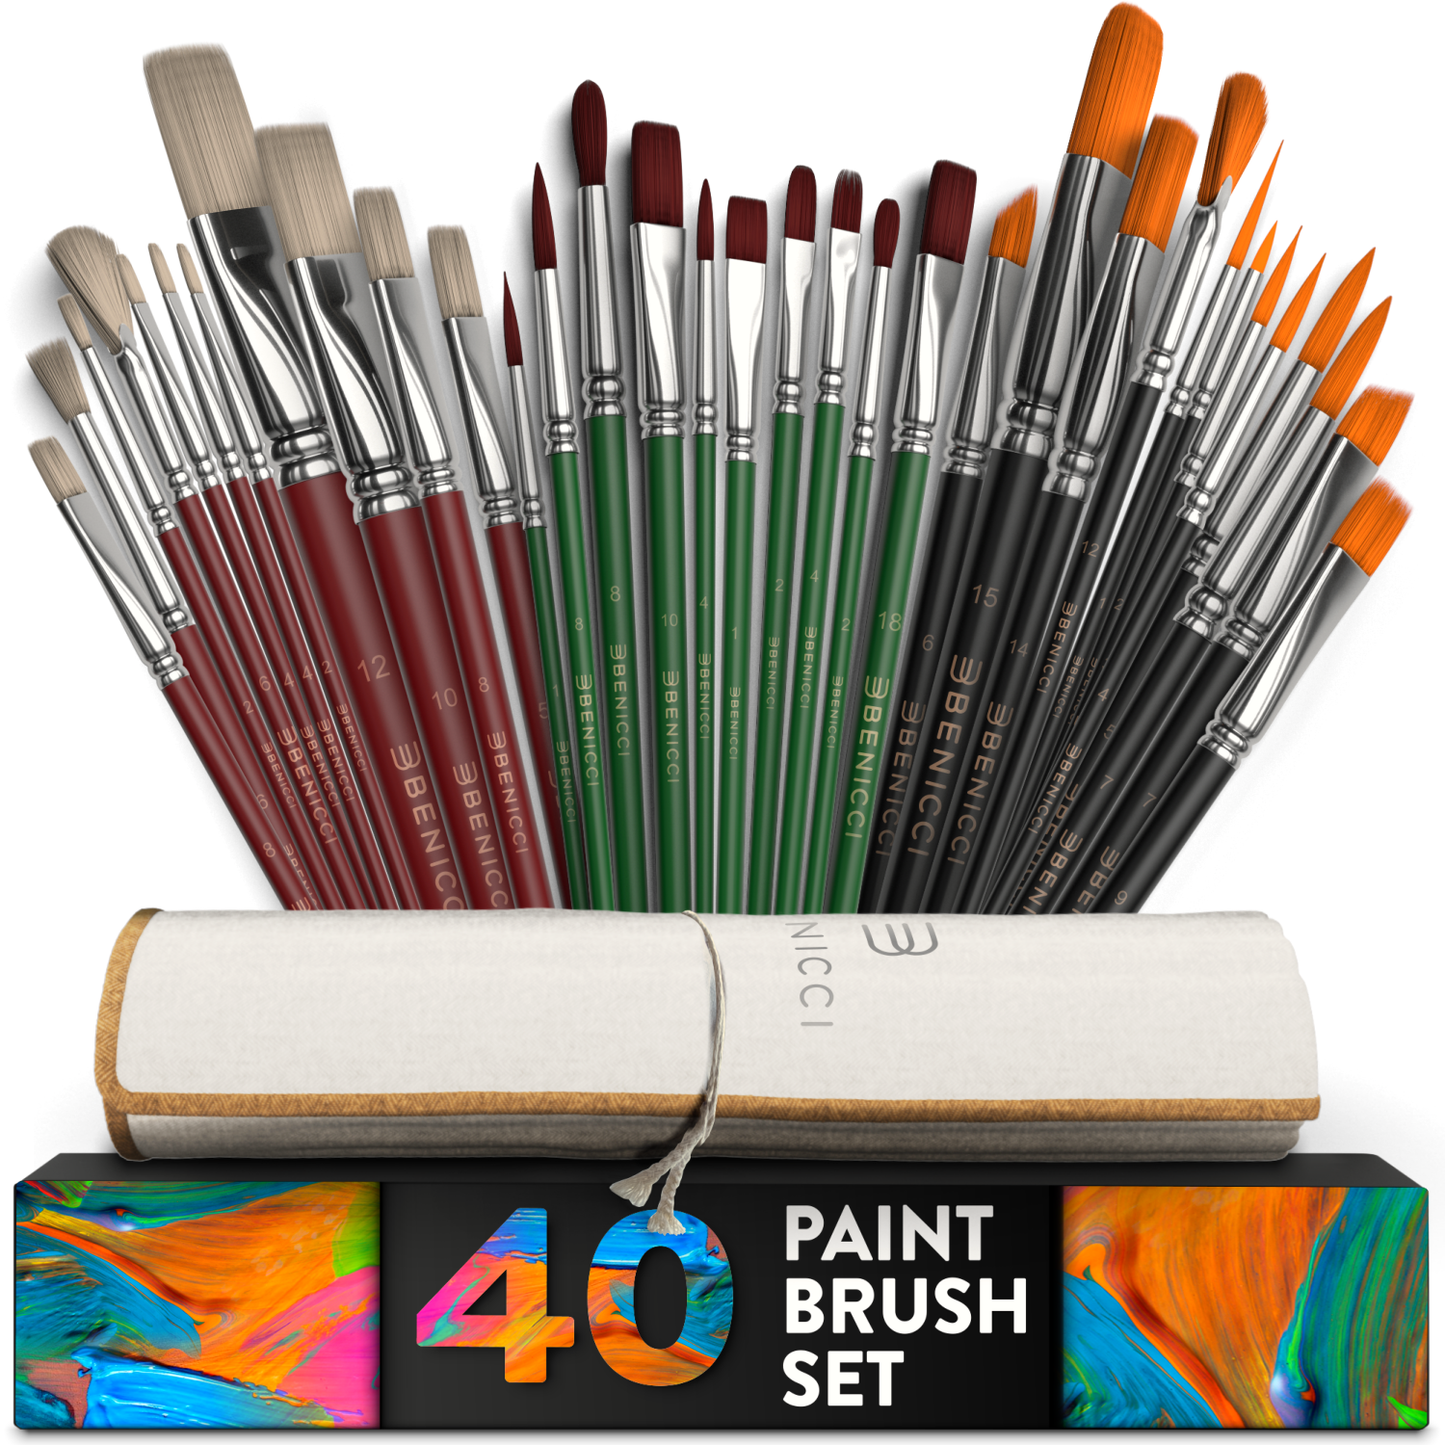 Paint brushes and colors Canvas Print